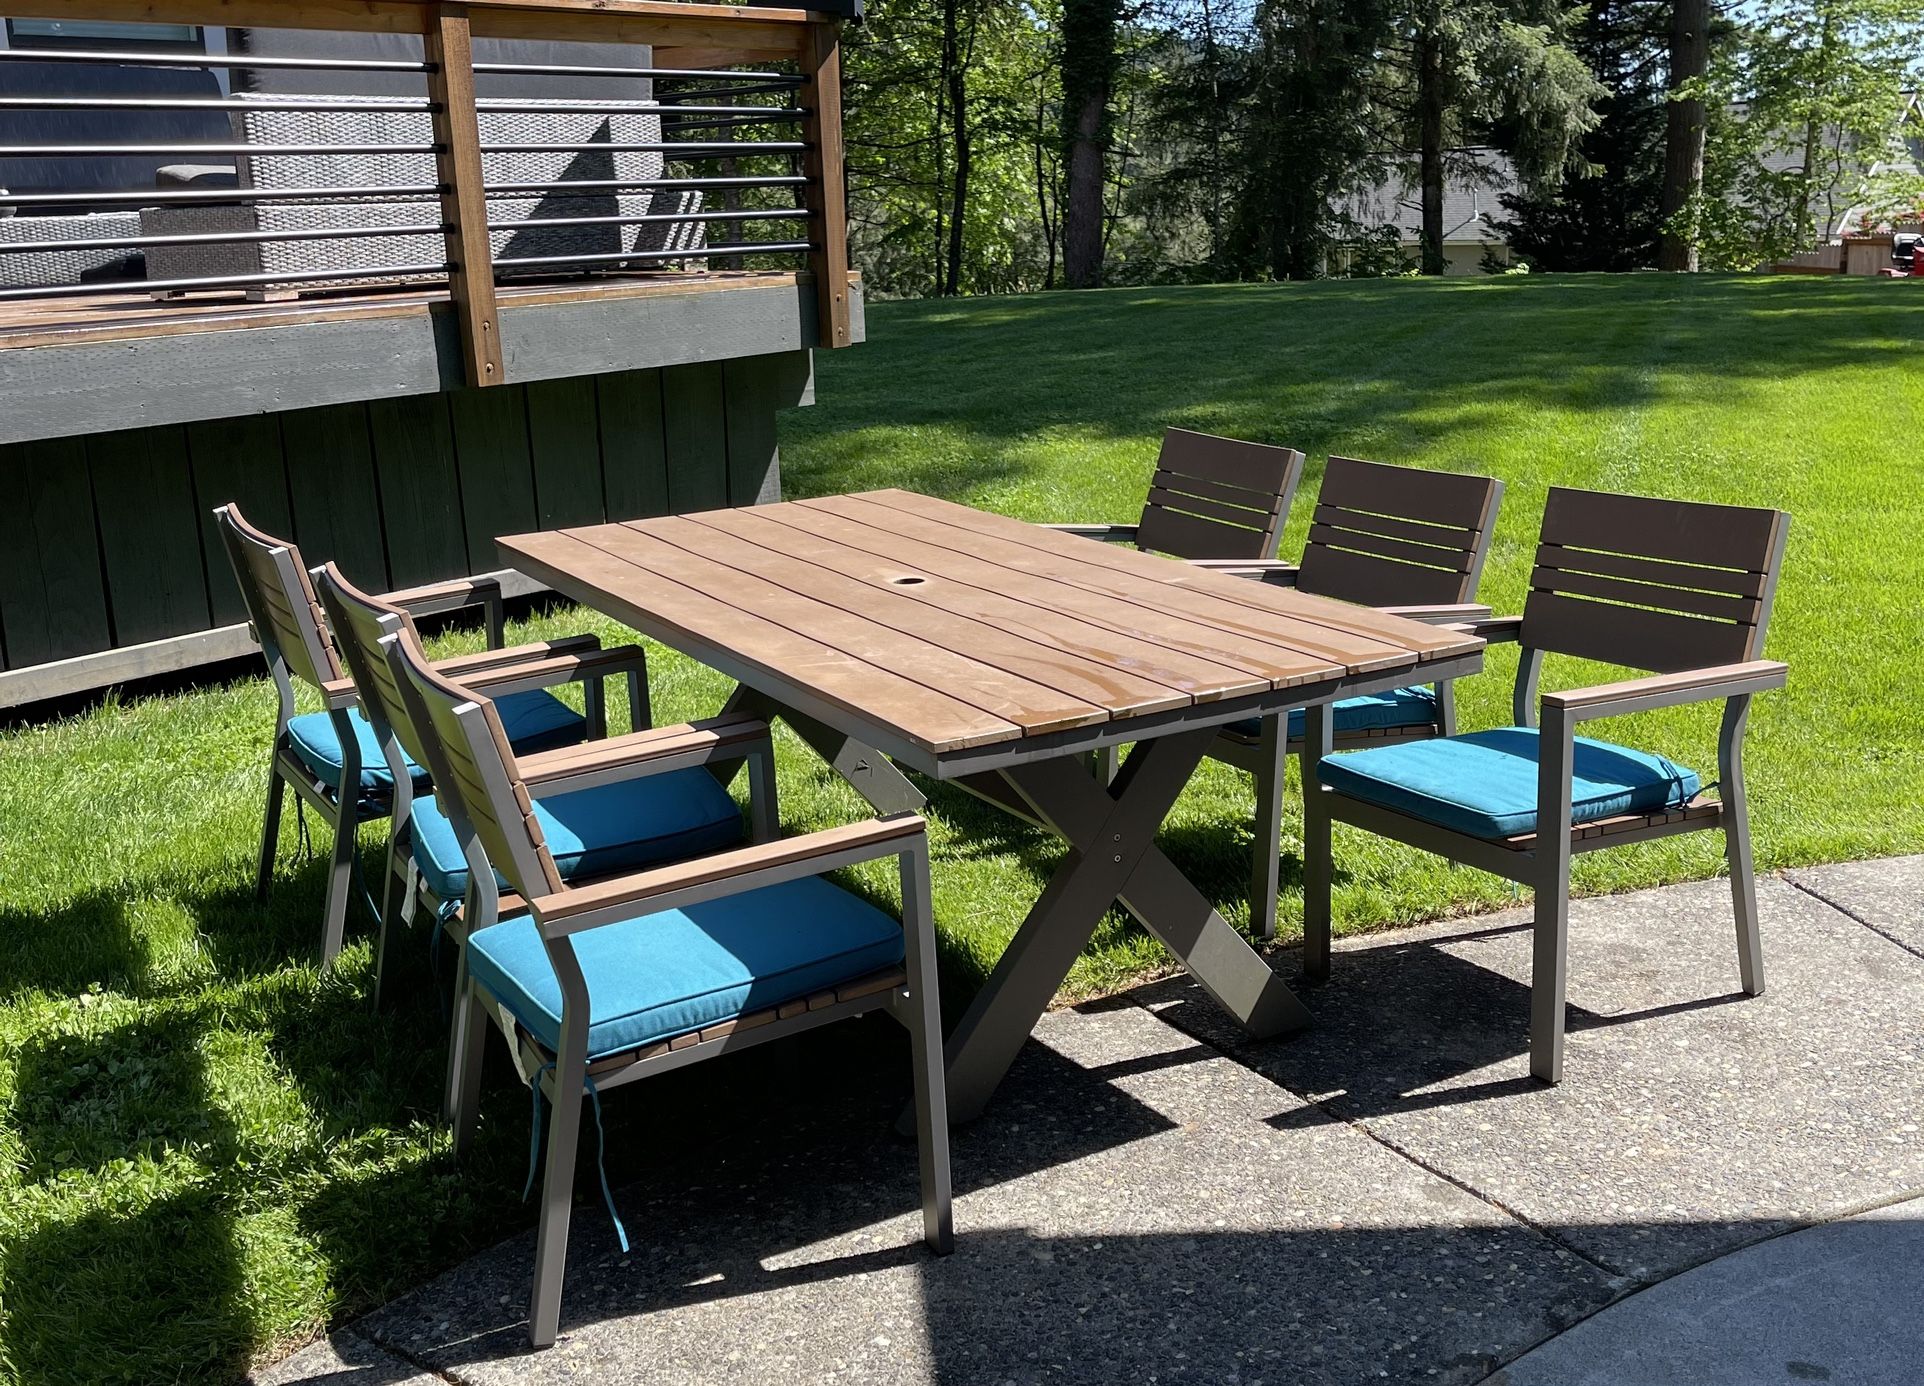 Patio Table And 6 Chairs